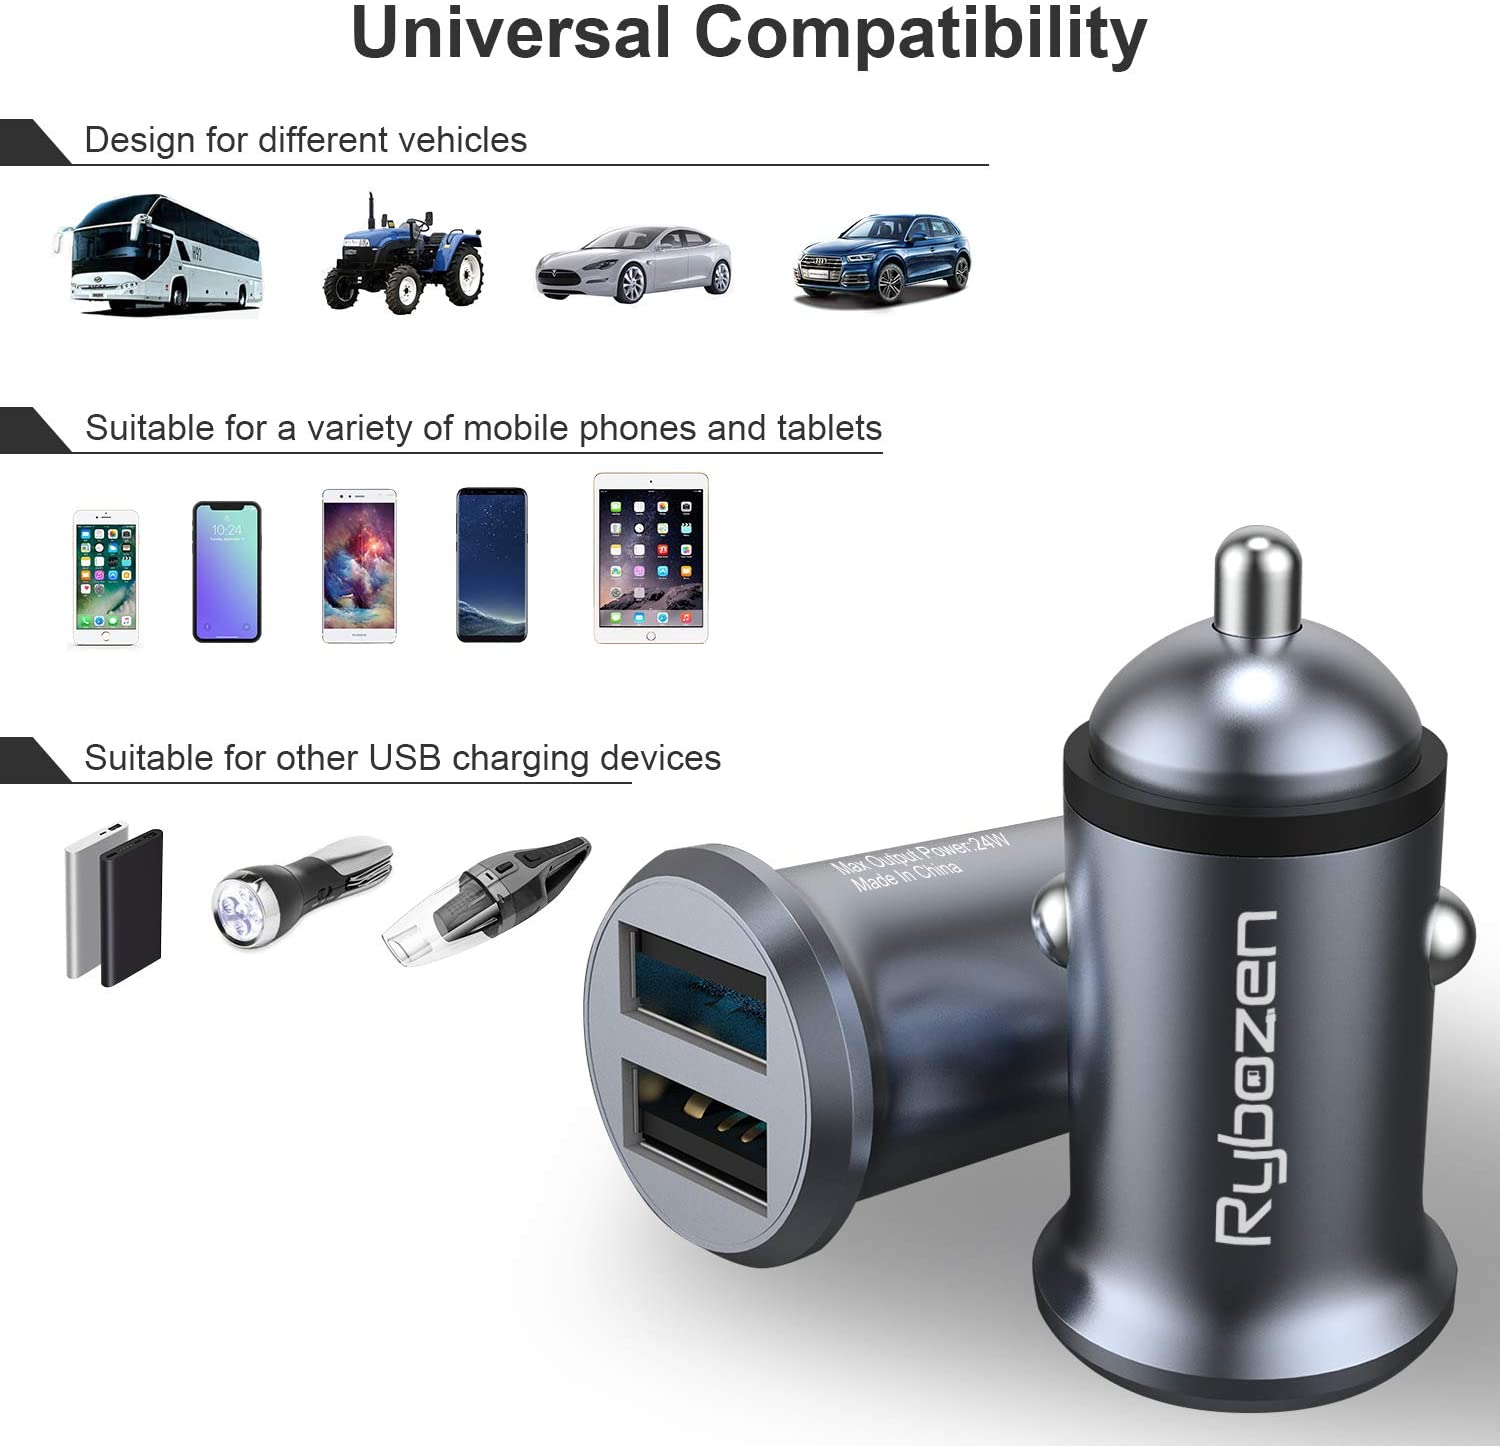 Rybozen Car Charger, Mini 4.8A All Metal USB Car Charger, PowerDrive 2 Alloy Flush Fit Car Charger Adapter Dual Port Charging,for iPhone 12/11 pro/XR/x/7/6s, iPad Air 2/Mini 3, Note 9/Galaxy S10/S9/S8